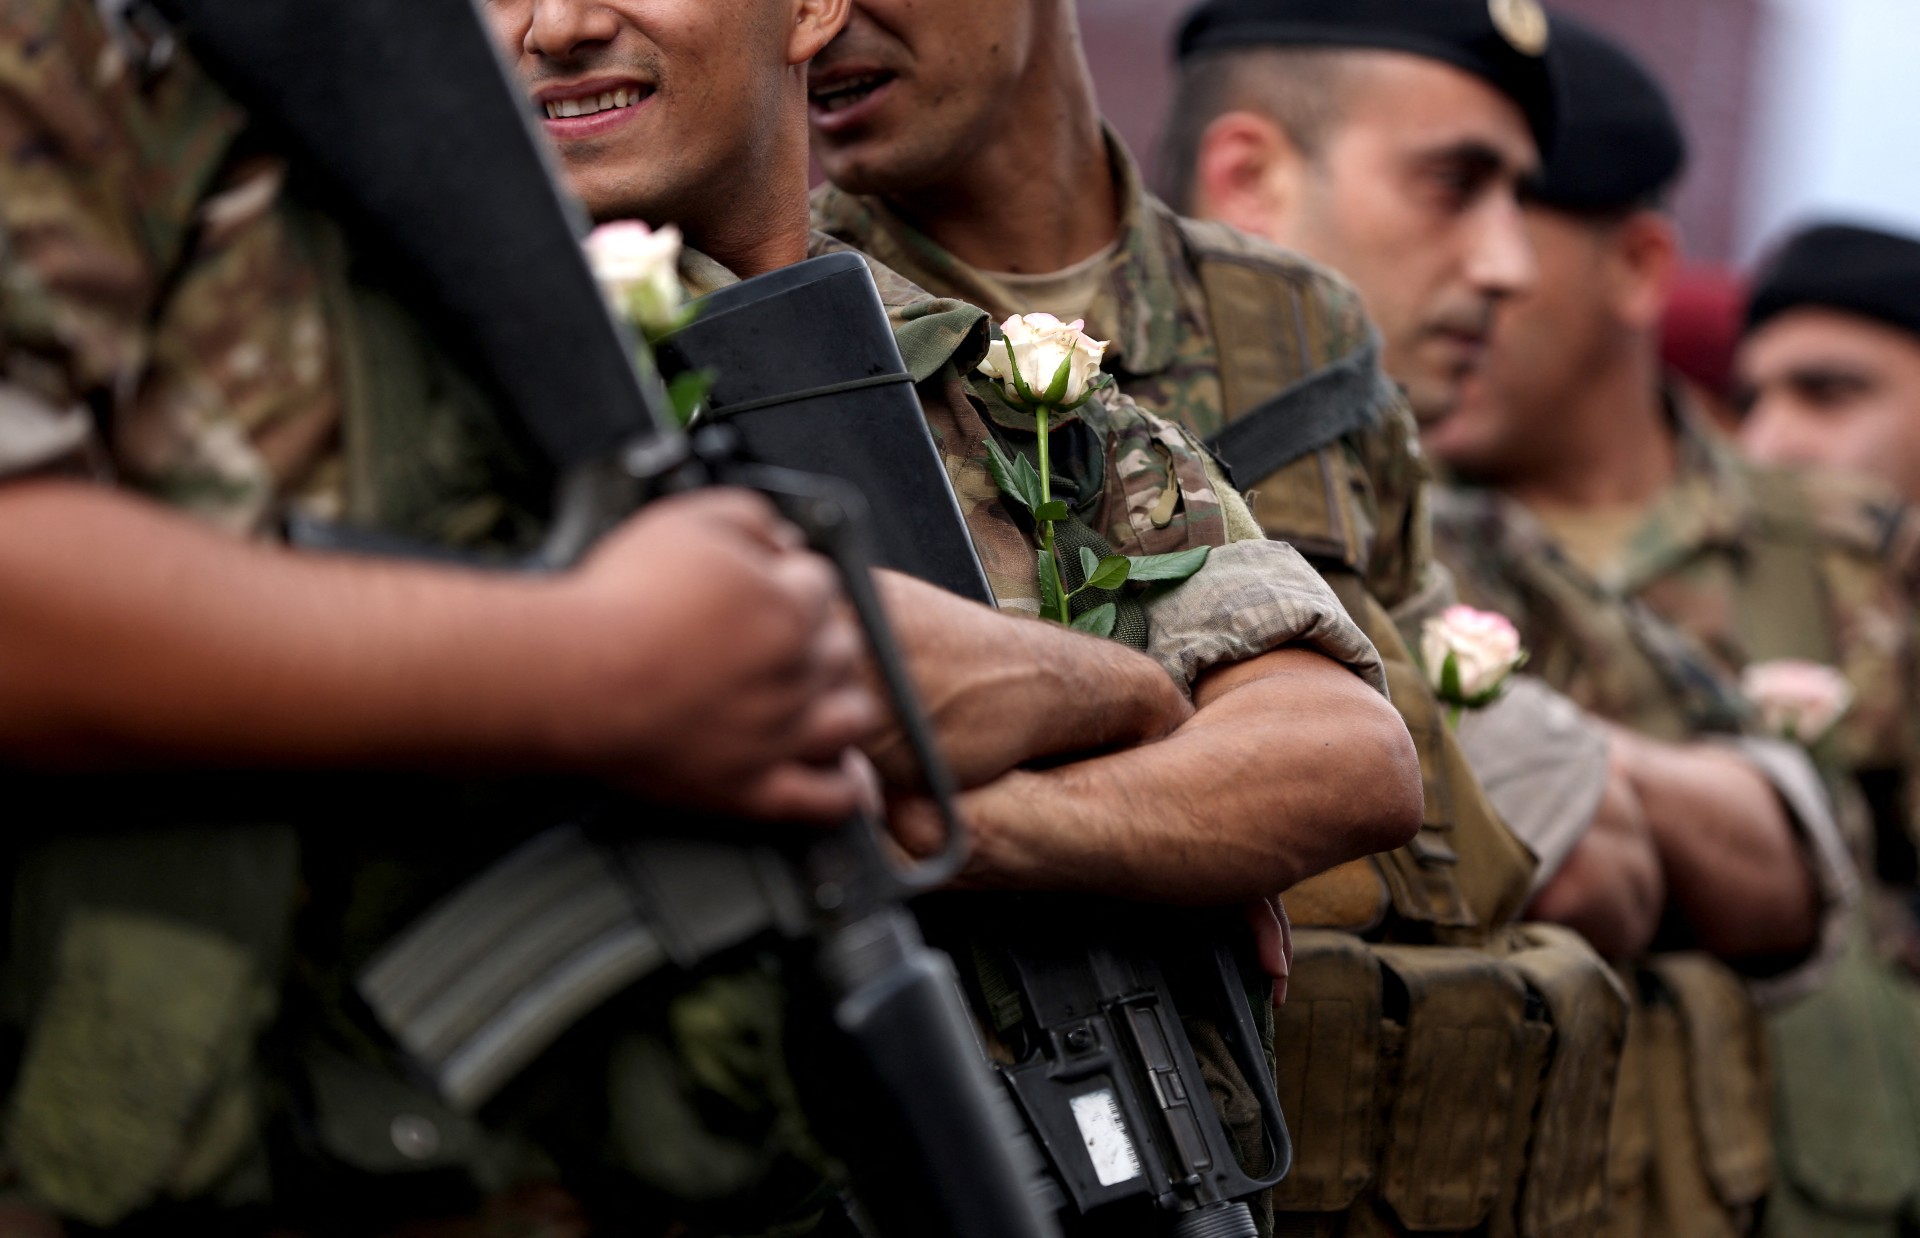 Lebanese army soldiers carry roses offered to them by anti-government protesters in the area of Jal al-Dib, on 23 October, 2019 (AFP)